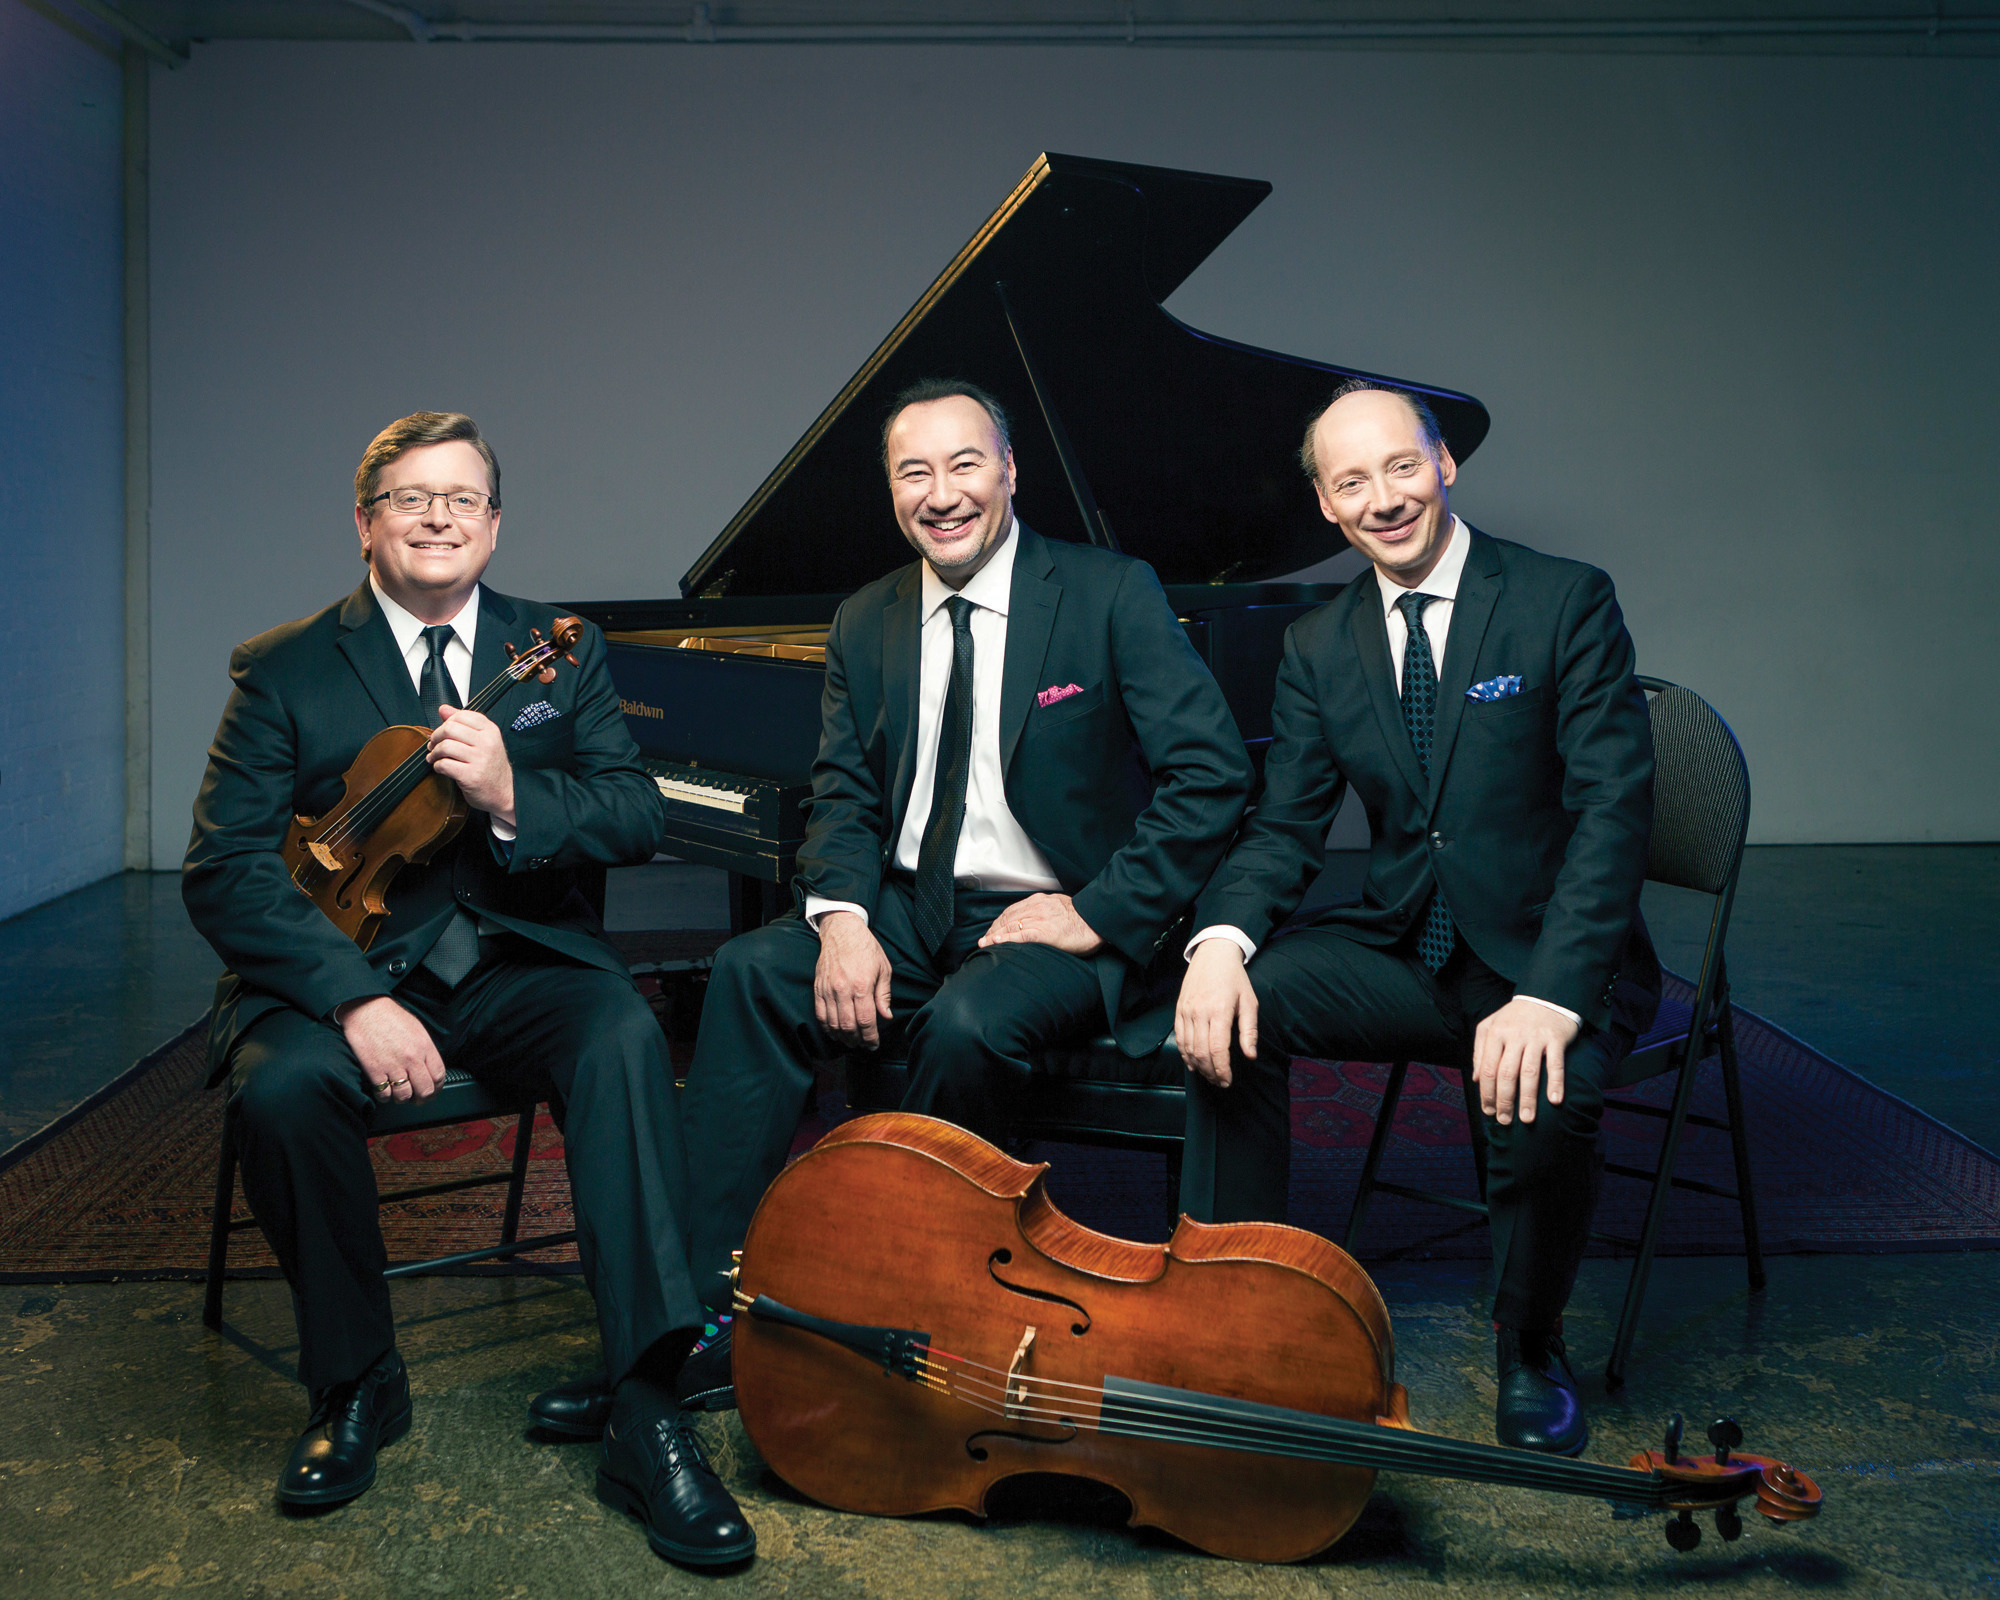 “Triple Crown” features the Montrose Trio, a collaboration formed in 2013 from a long relationship between pianist Jon Kimura Parker and the Tokyo String Quartet. Courtesy photo